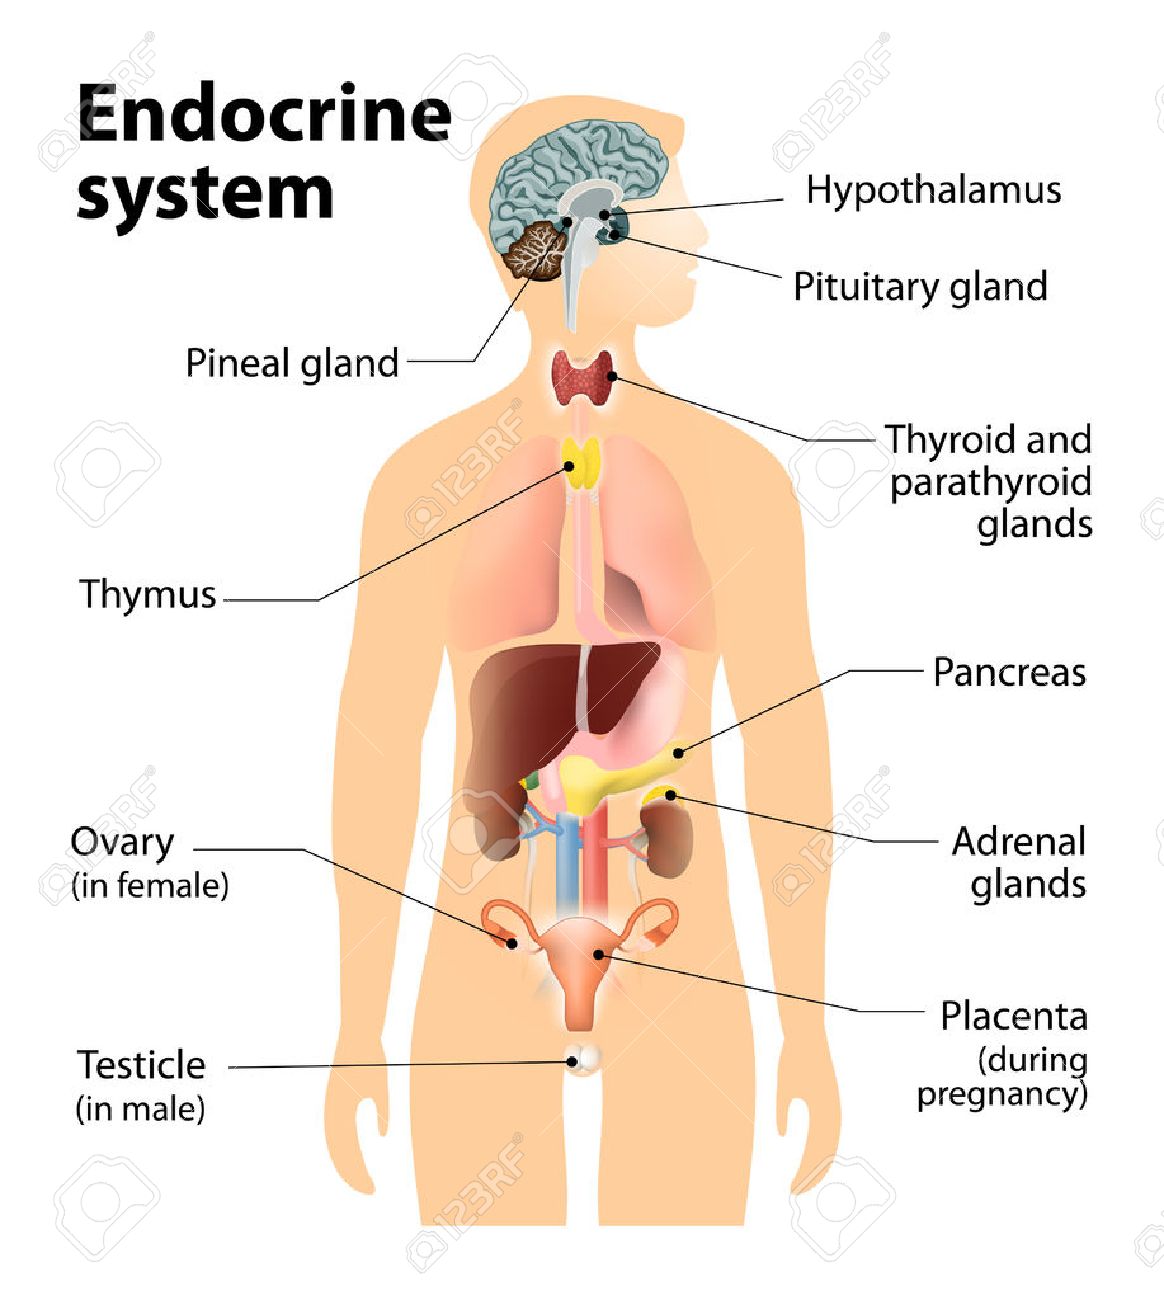 endocrine-system-human-anatomy-human-silhouette-with-highlighted-internal-organs-.jpg